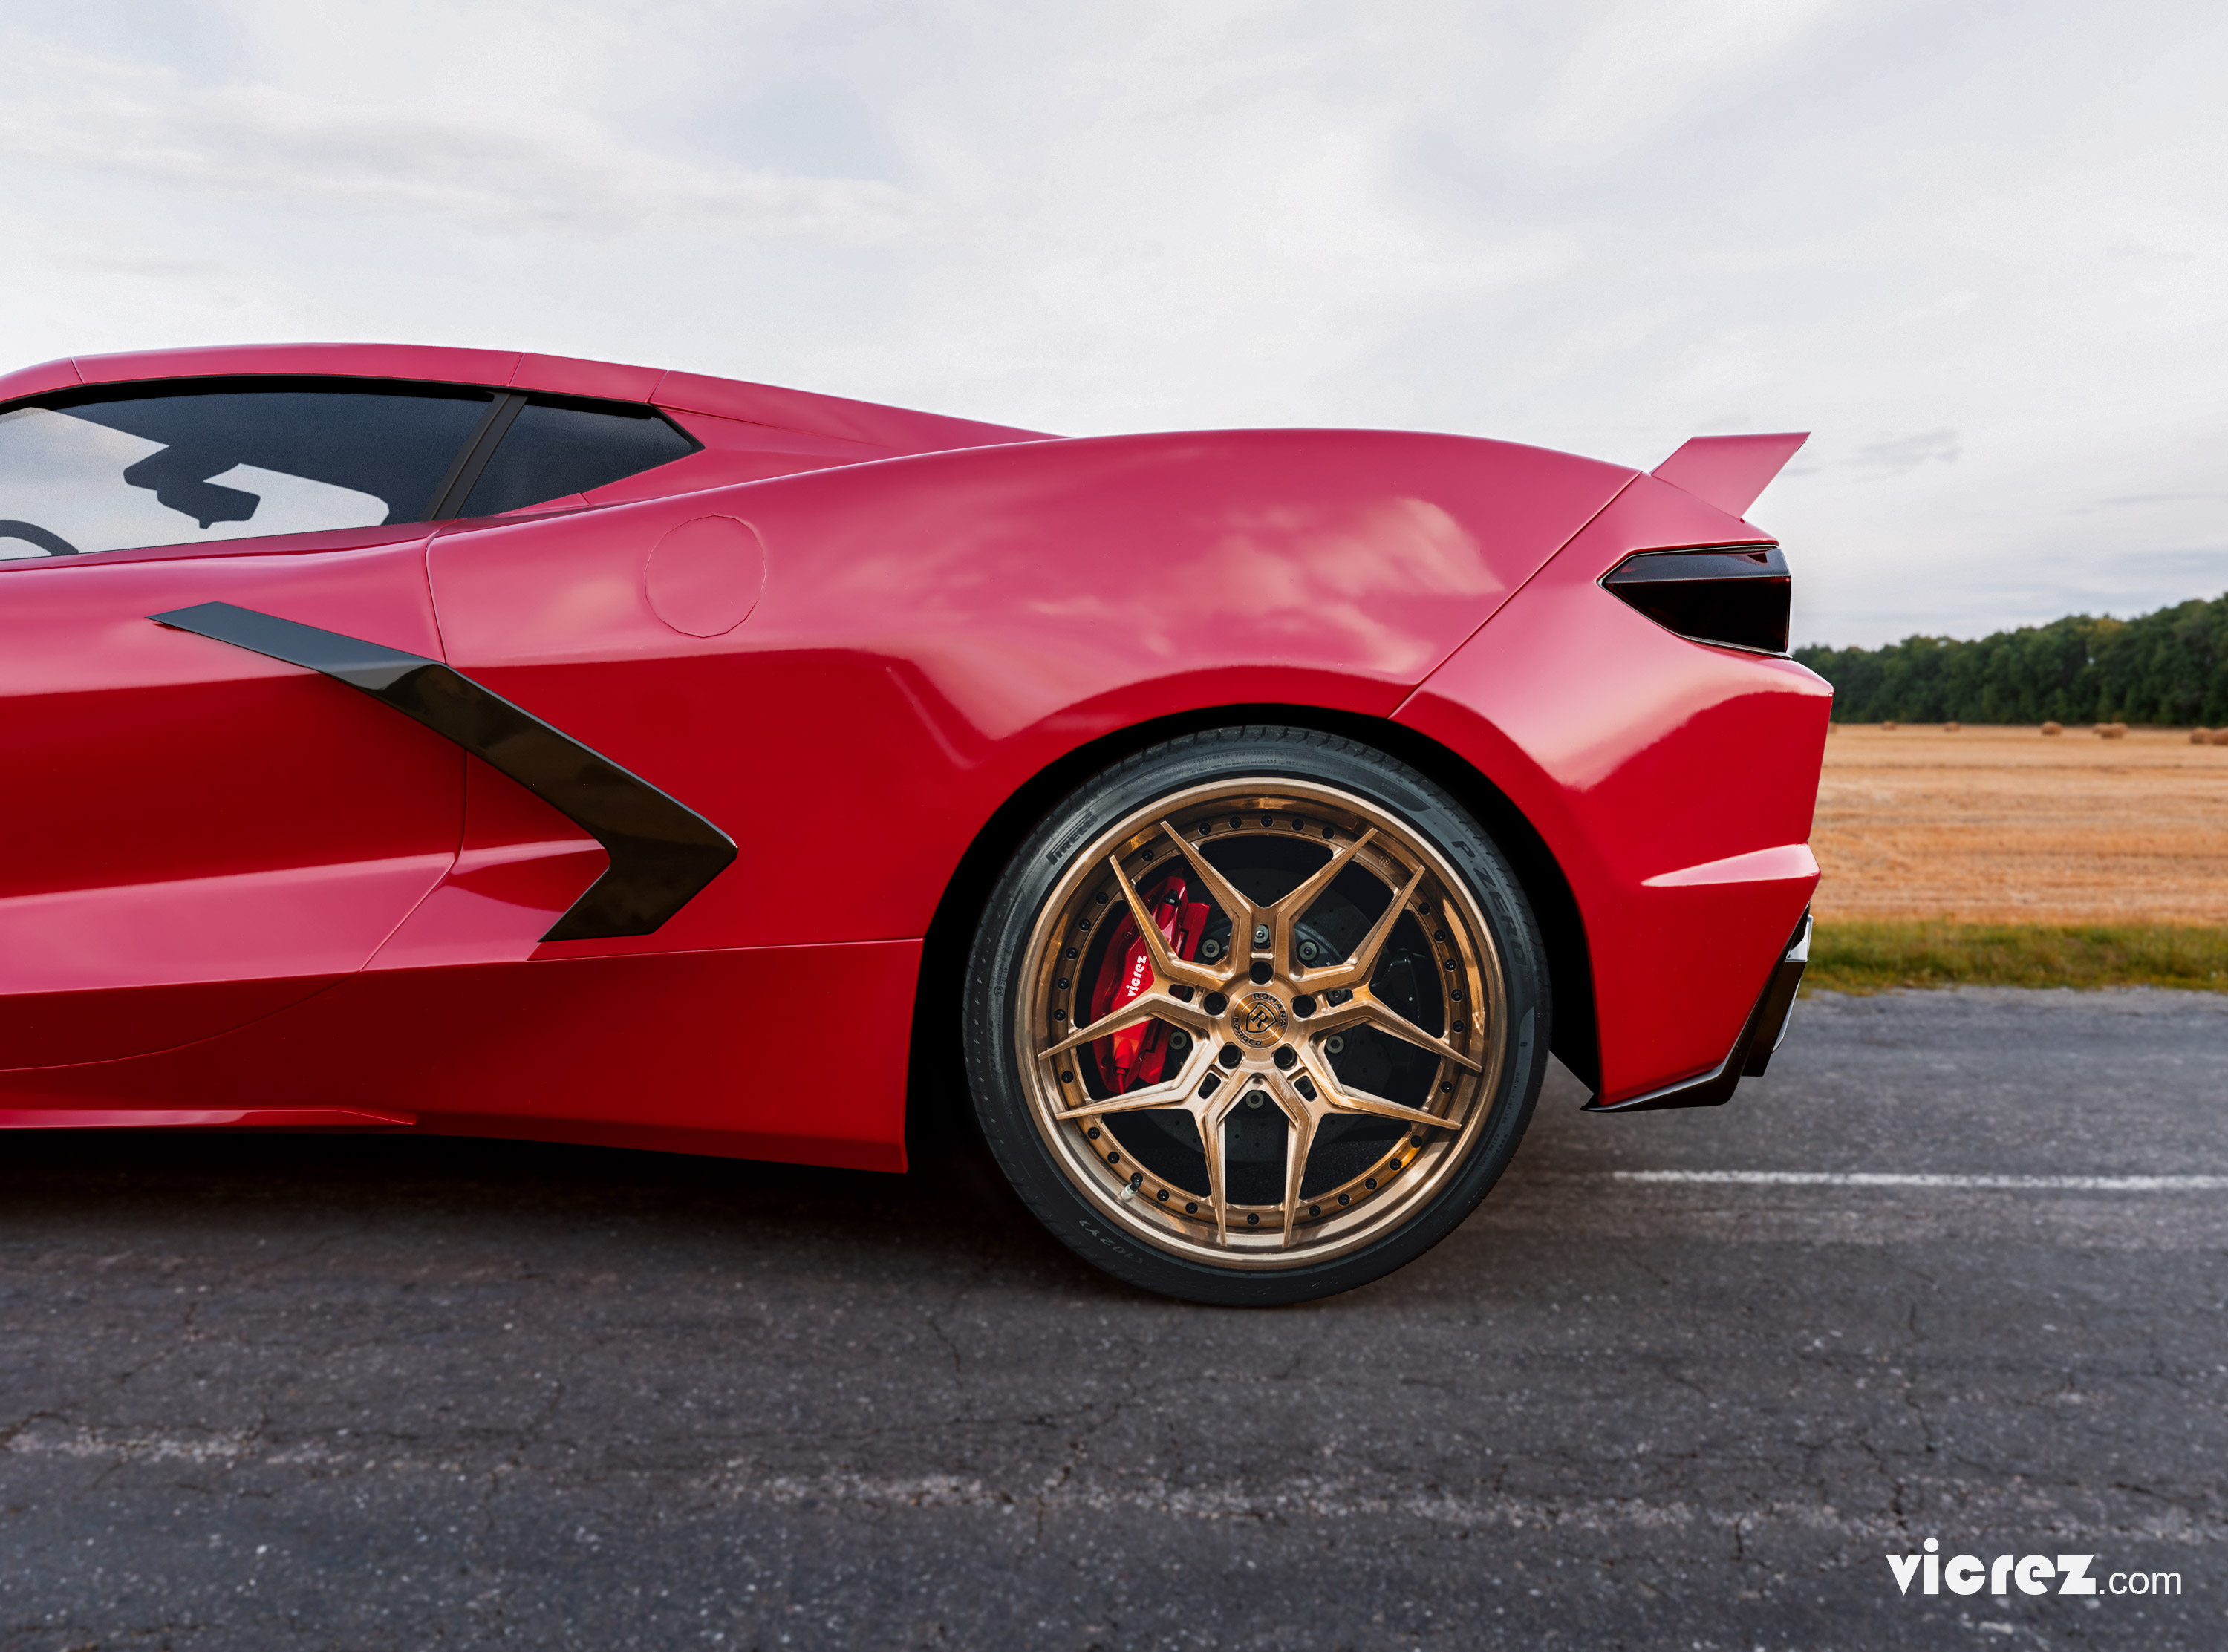 Corvette C8 x Rohana RFG5 Wheels (Finished in Brushed Radiant Copper with Polish Radiant Copper Lip)